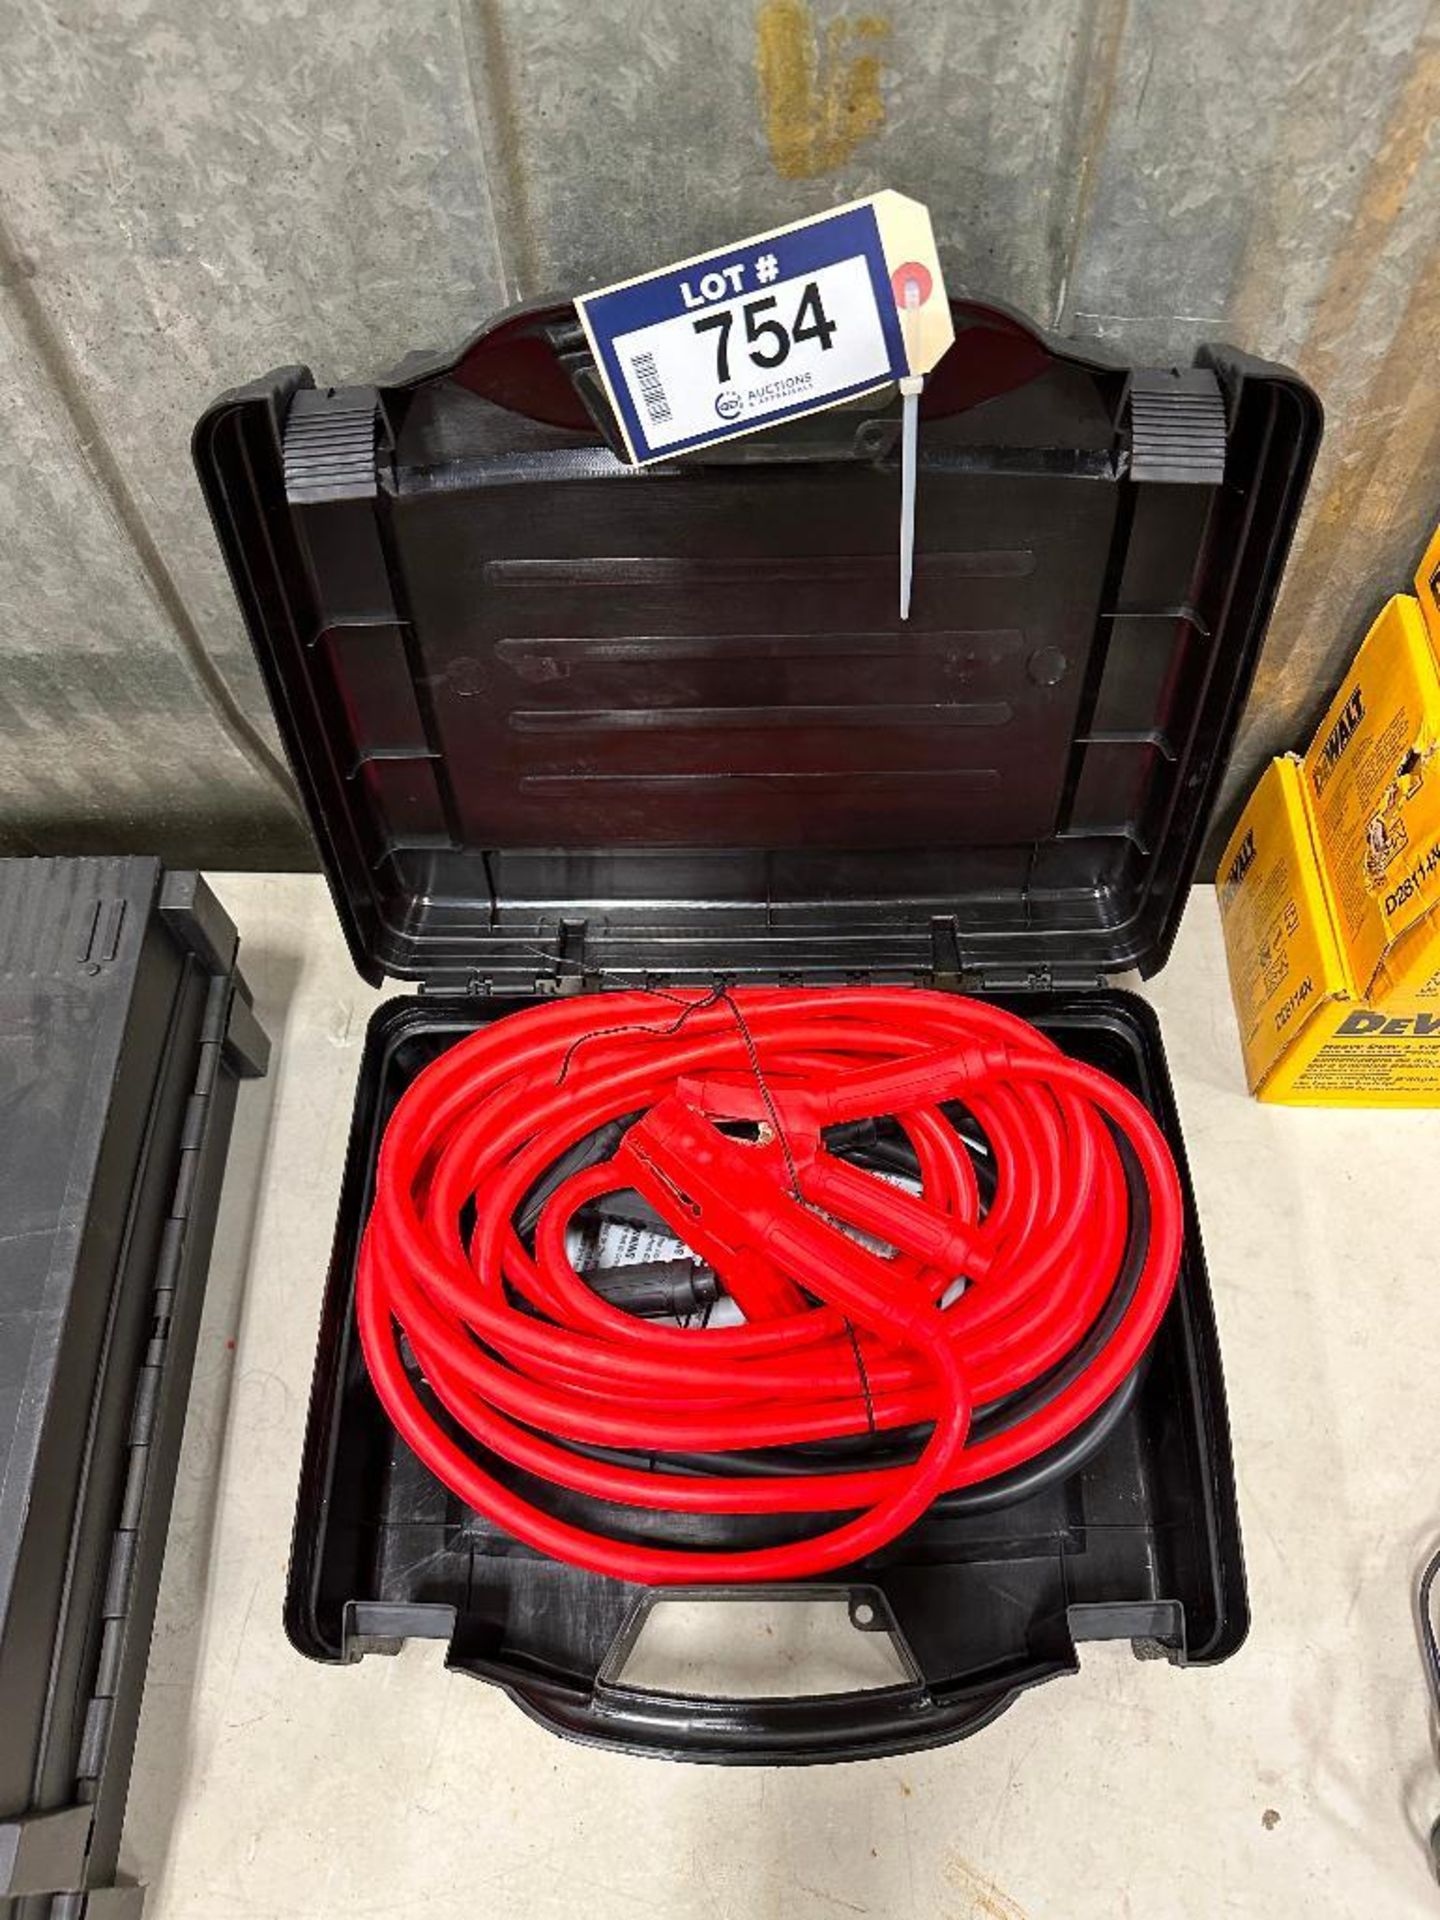 Pro-Start 1000 HD 25ft. 1Ga. Professional Series Booster Cables - Image 2 of 4